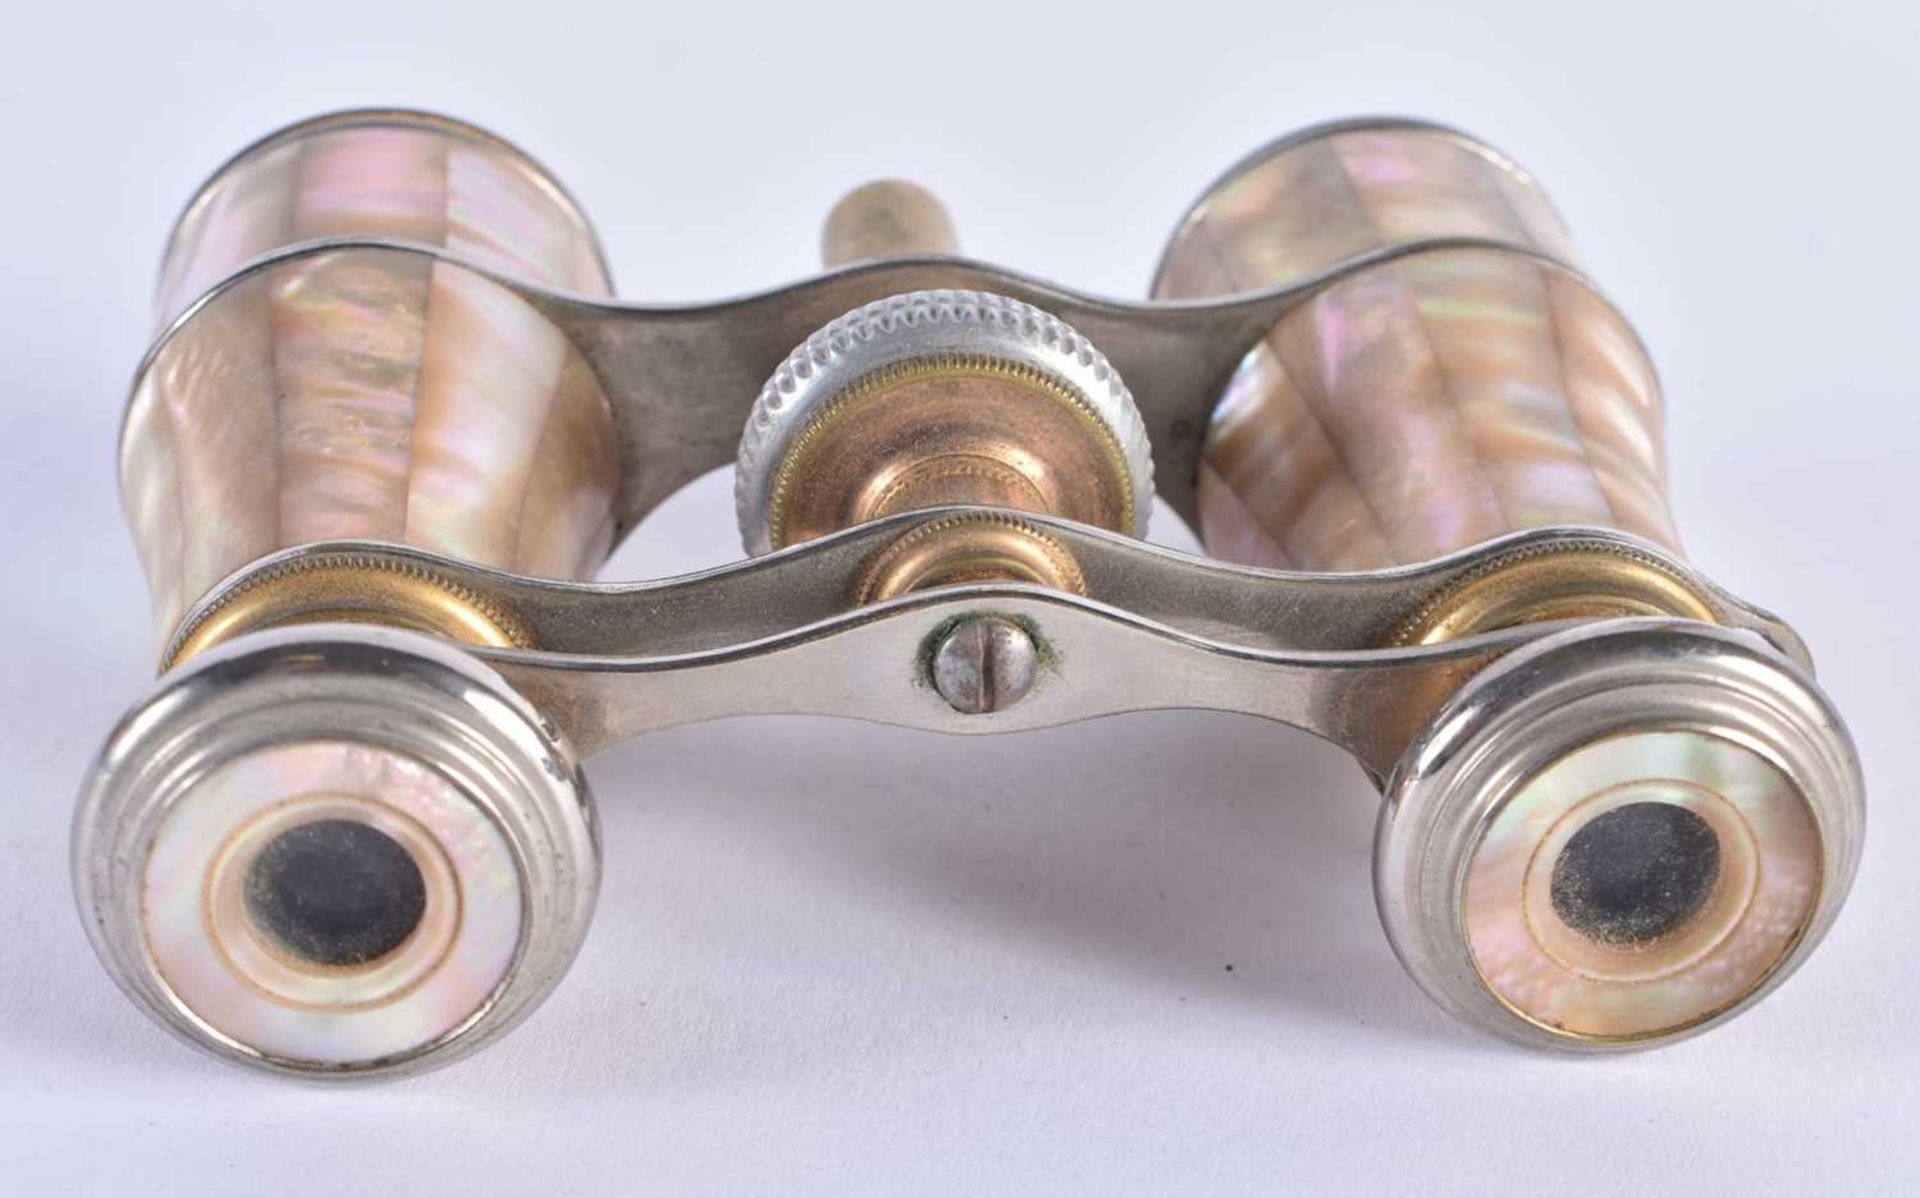 A PAIR OF MOTHER OF PEARL OPERA GLASSES. 9 cm x 8 cm extended. - Image 3 of 5